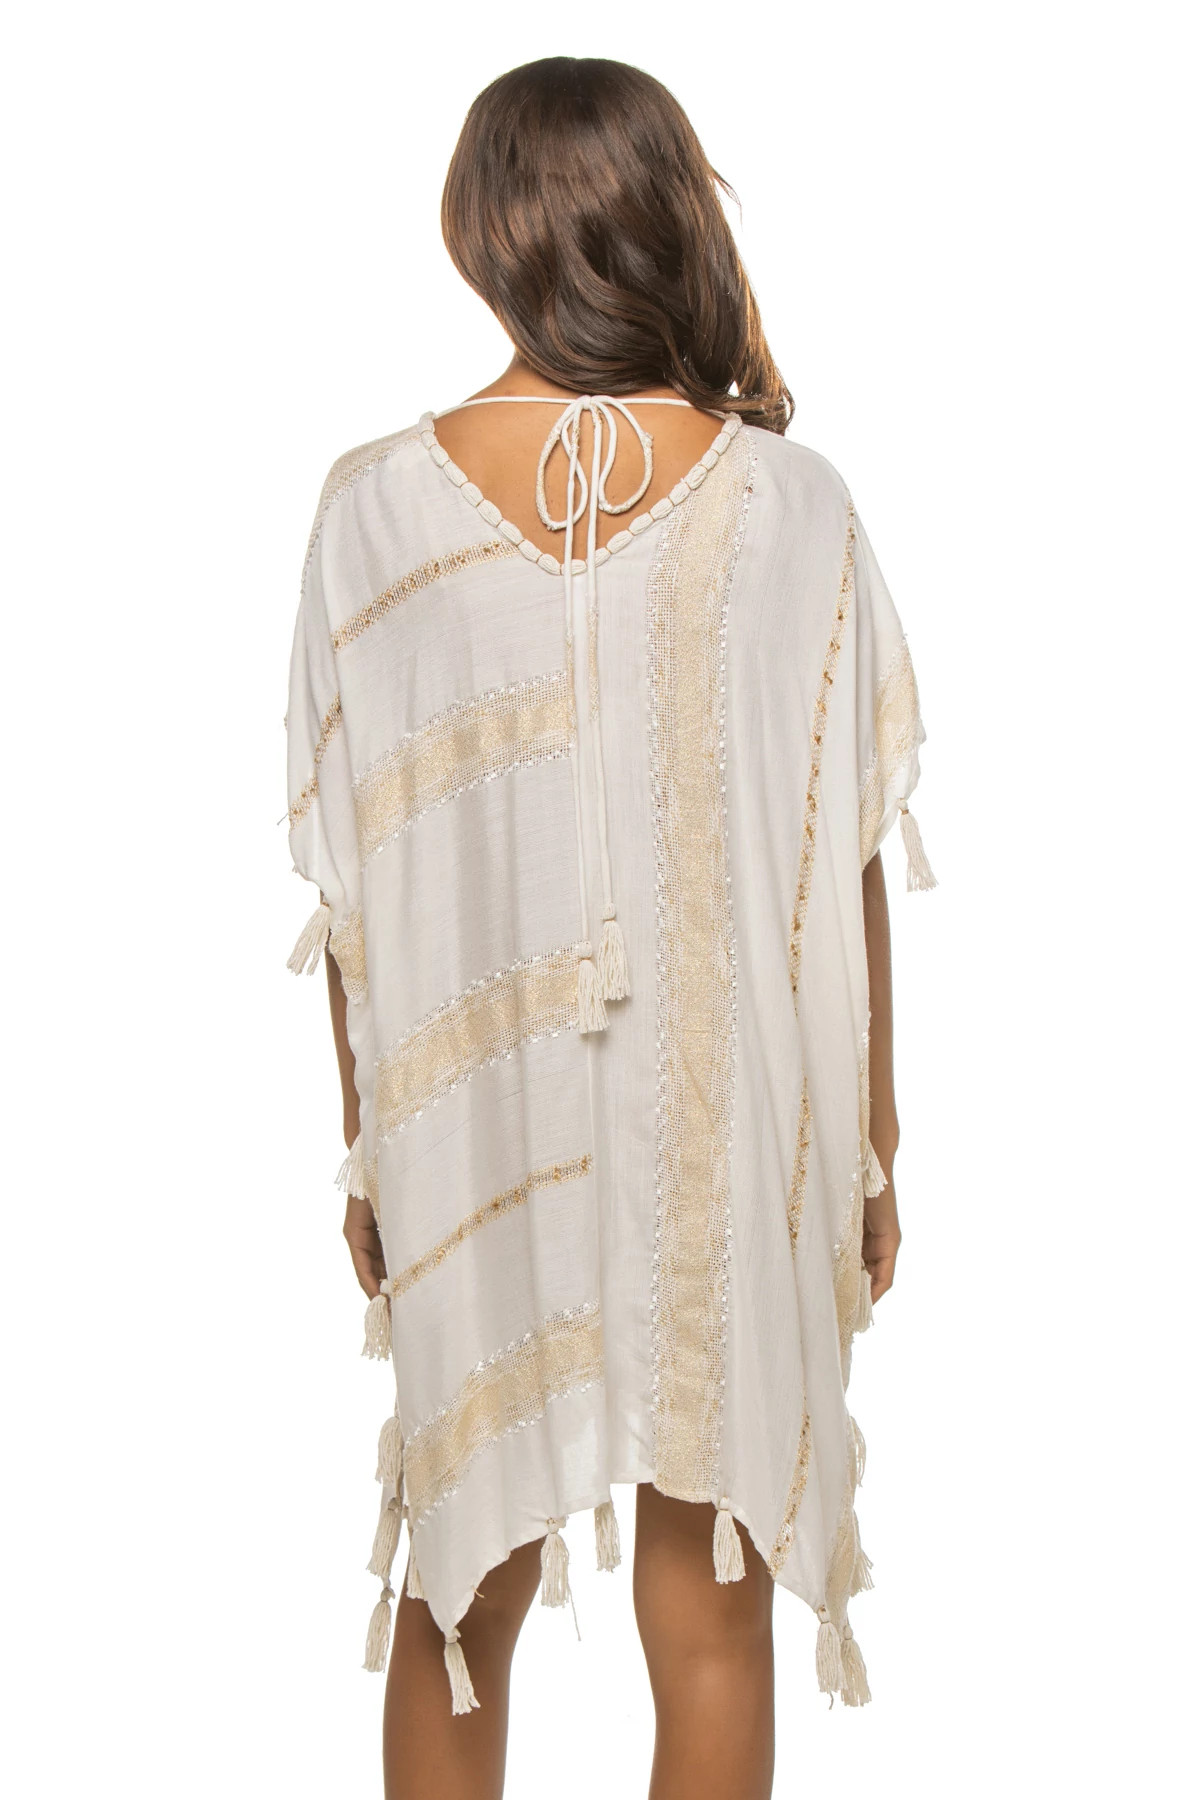 GOLDEN Stripes Square Tunic image number 2